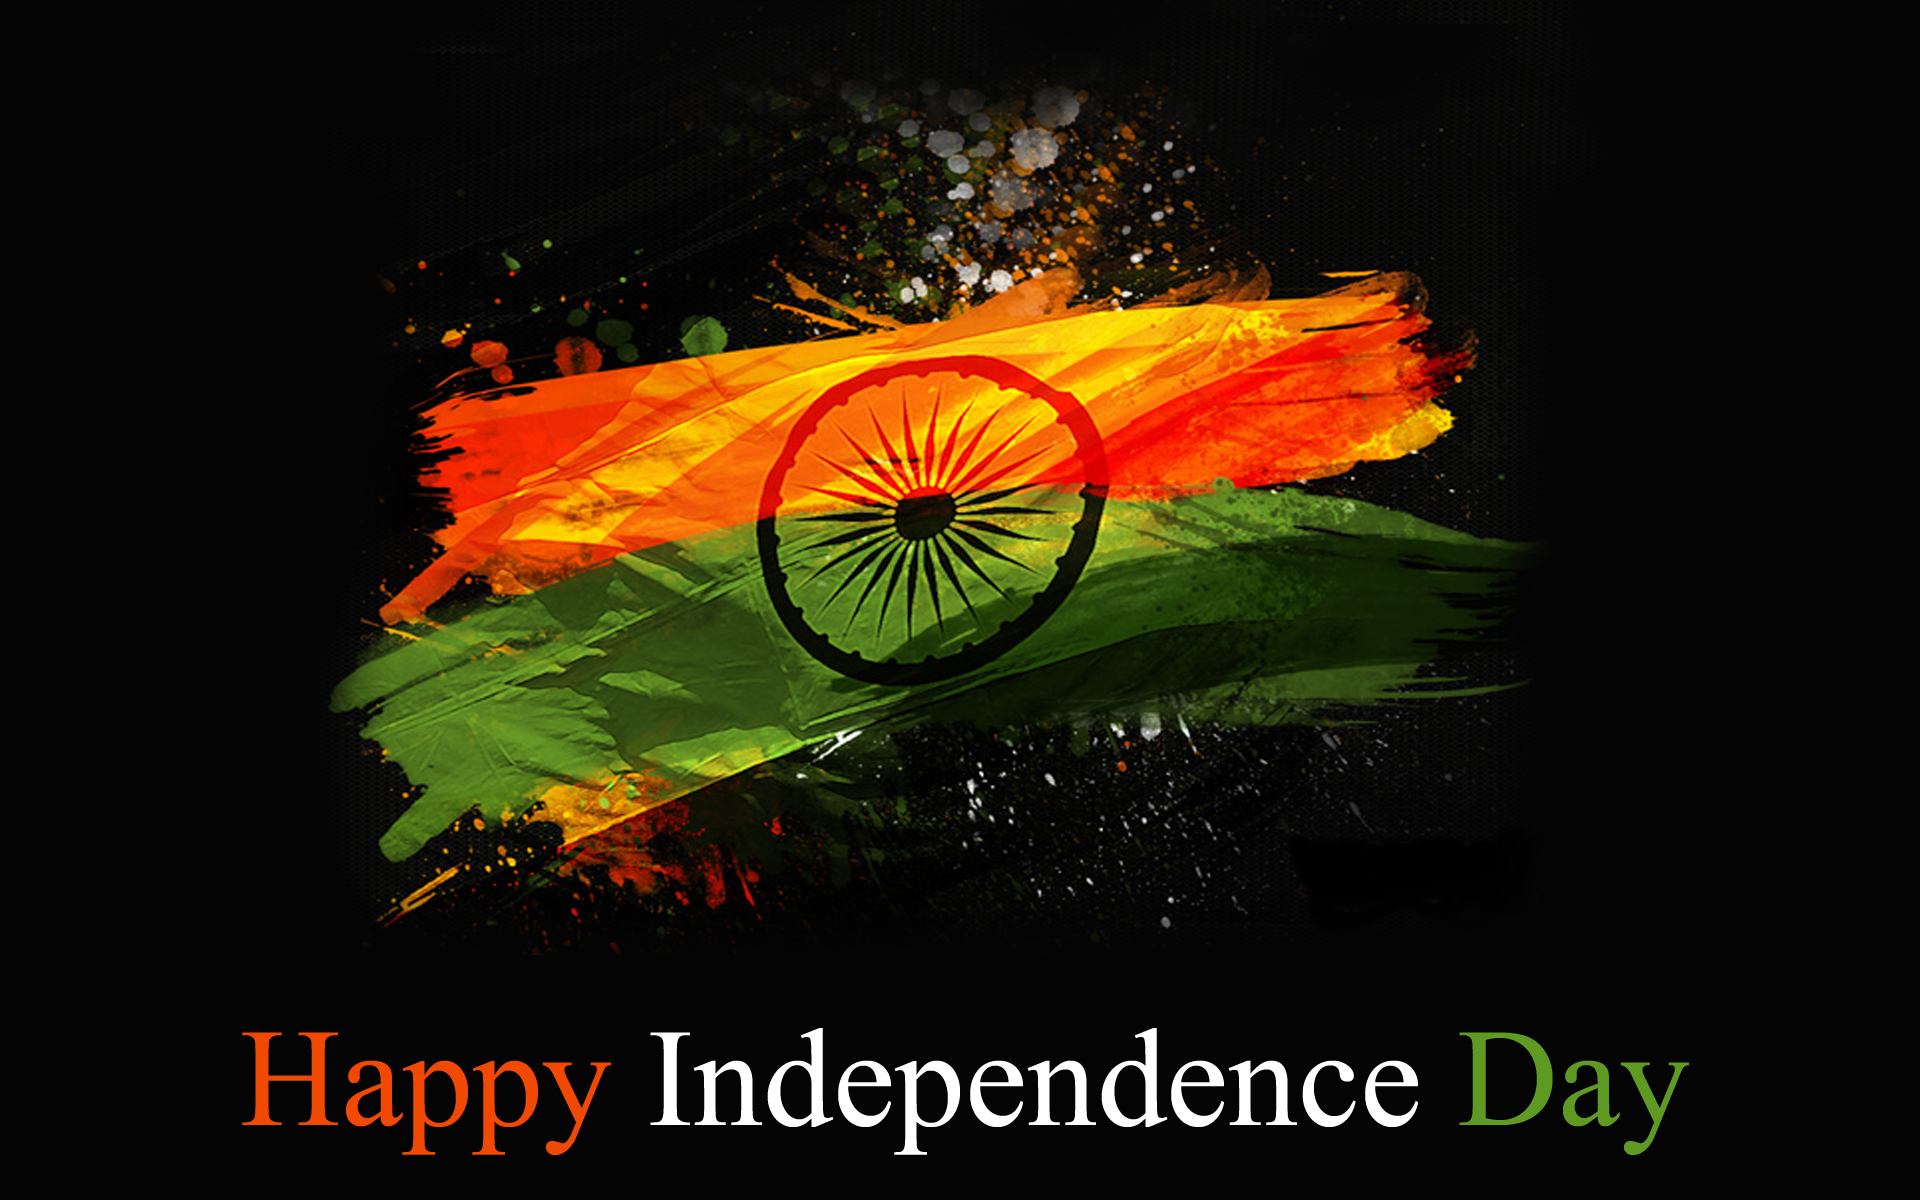 independence day hd wallpaper 2015 happy propose day wallpapers hd